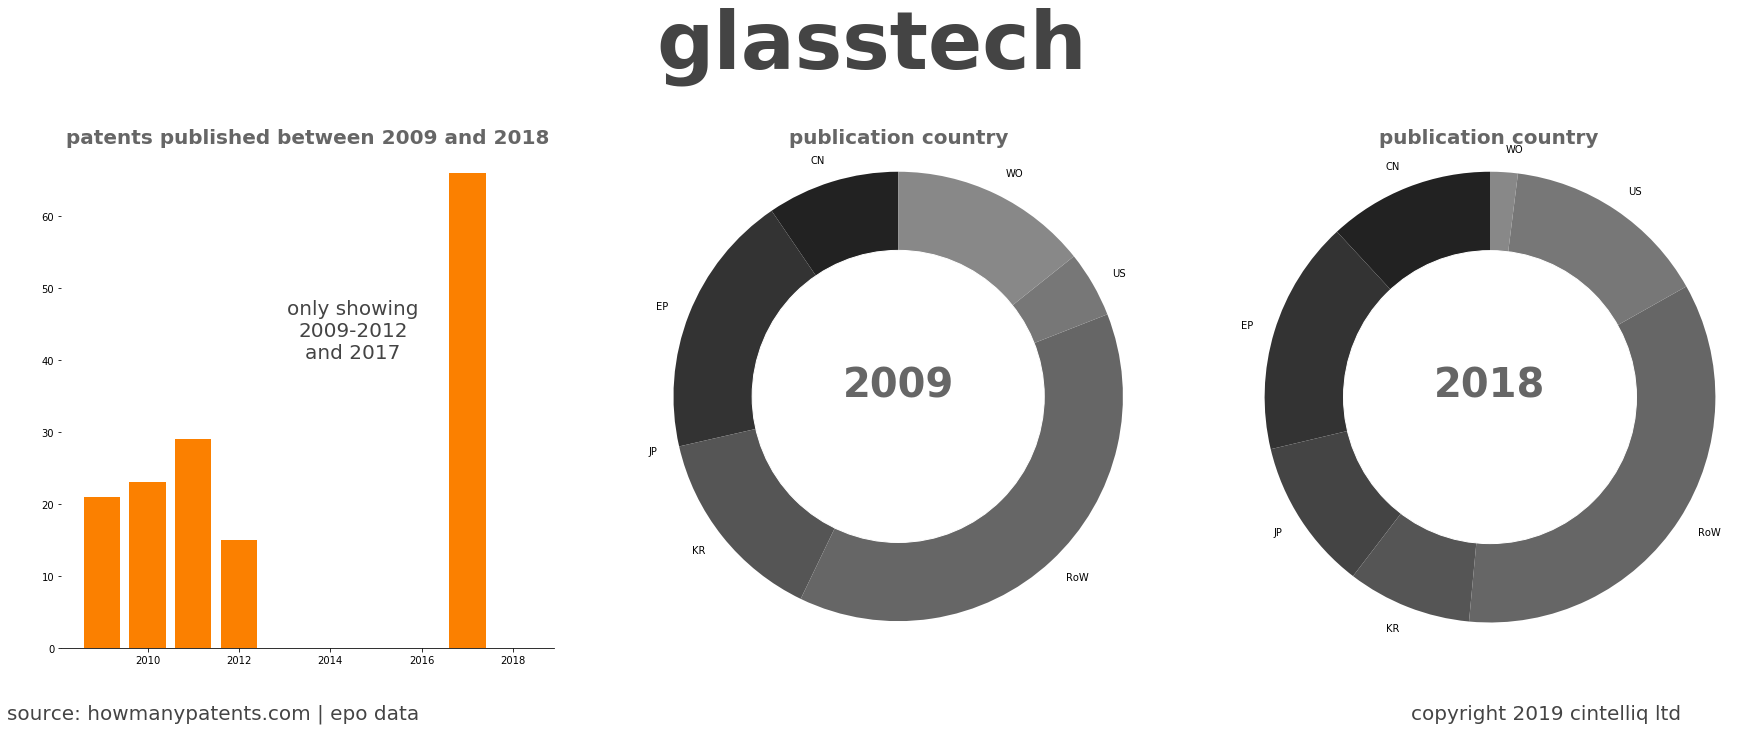 summary of patents for Glasstech